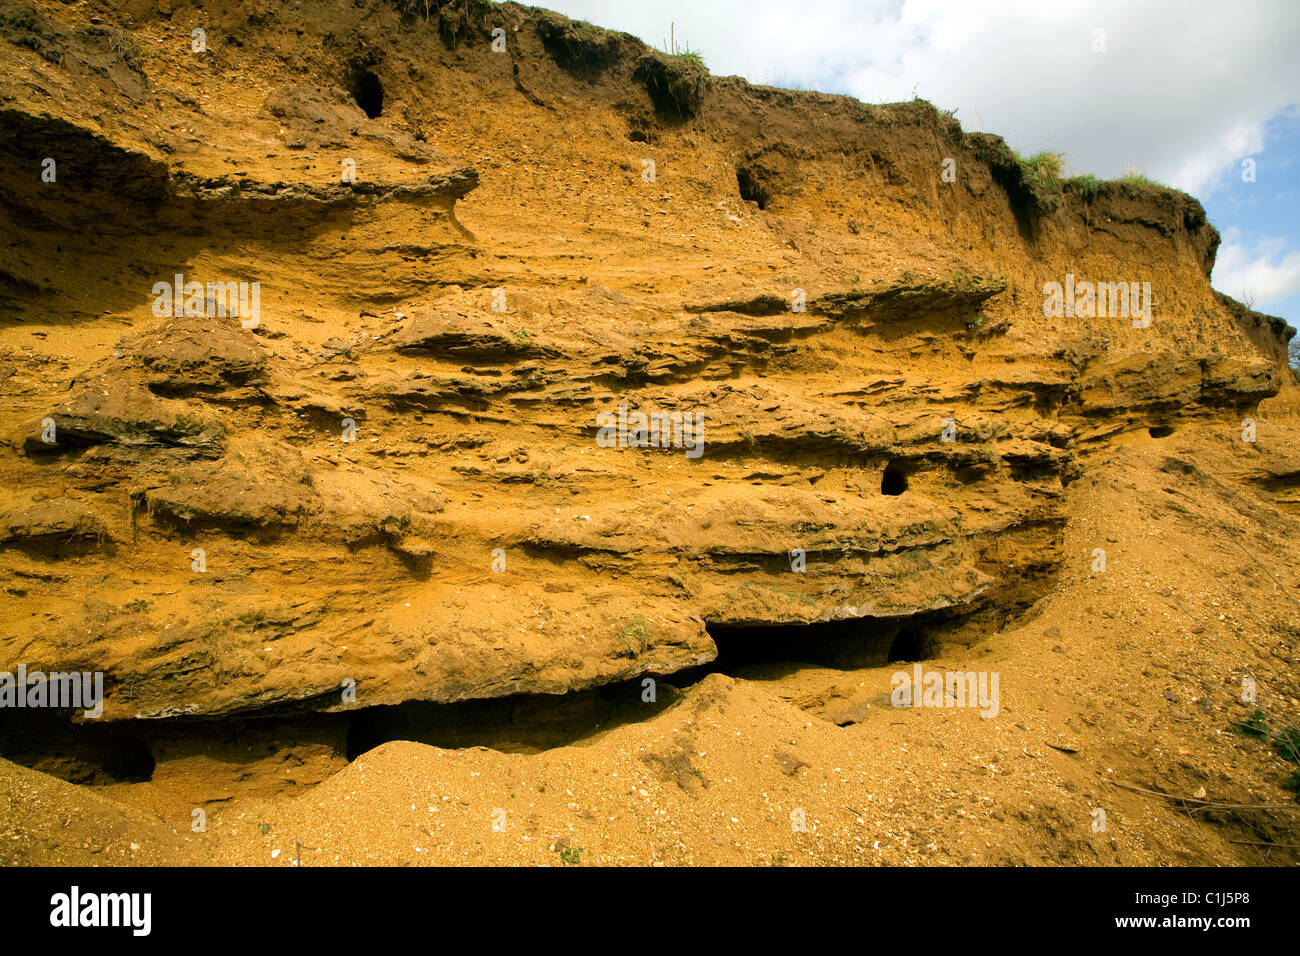 Layers strata Red Crag rock in quarry Sutton England Stock Photo - Alamy